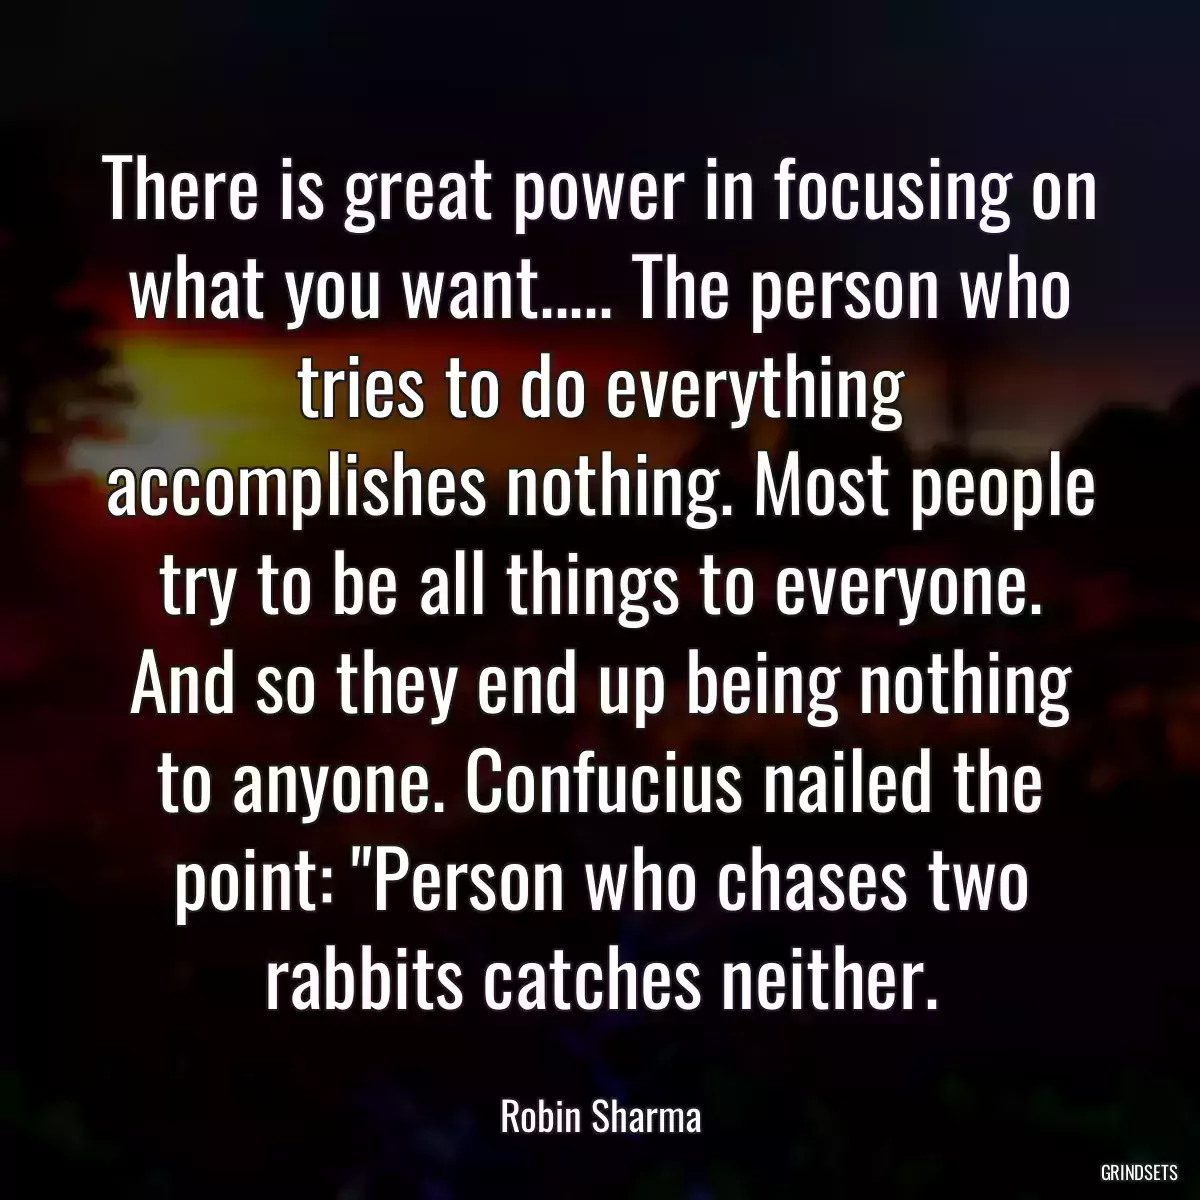 There is great power in focusing on what you want..... The person who tries to do everything accomplishes nothing. Most people try to be all things to everyone. And so they end up being nothing to anyone. Confucius nailed the point: \